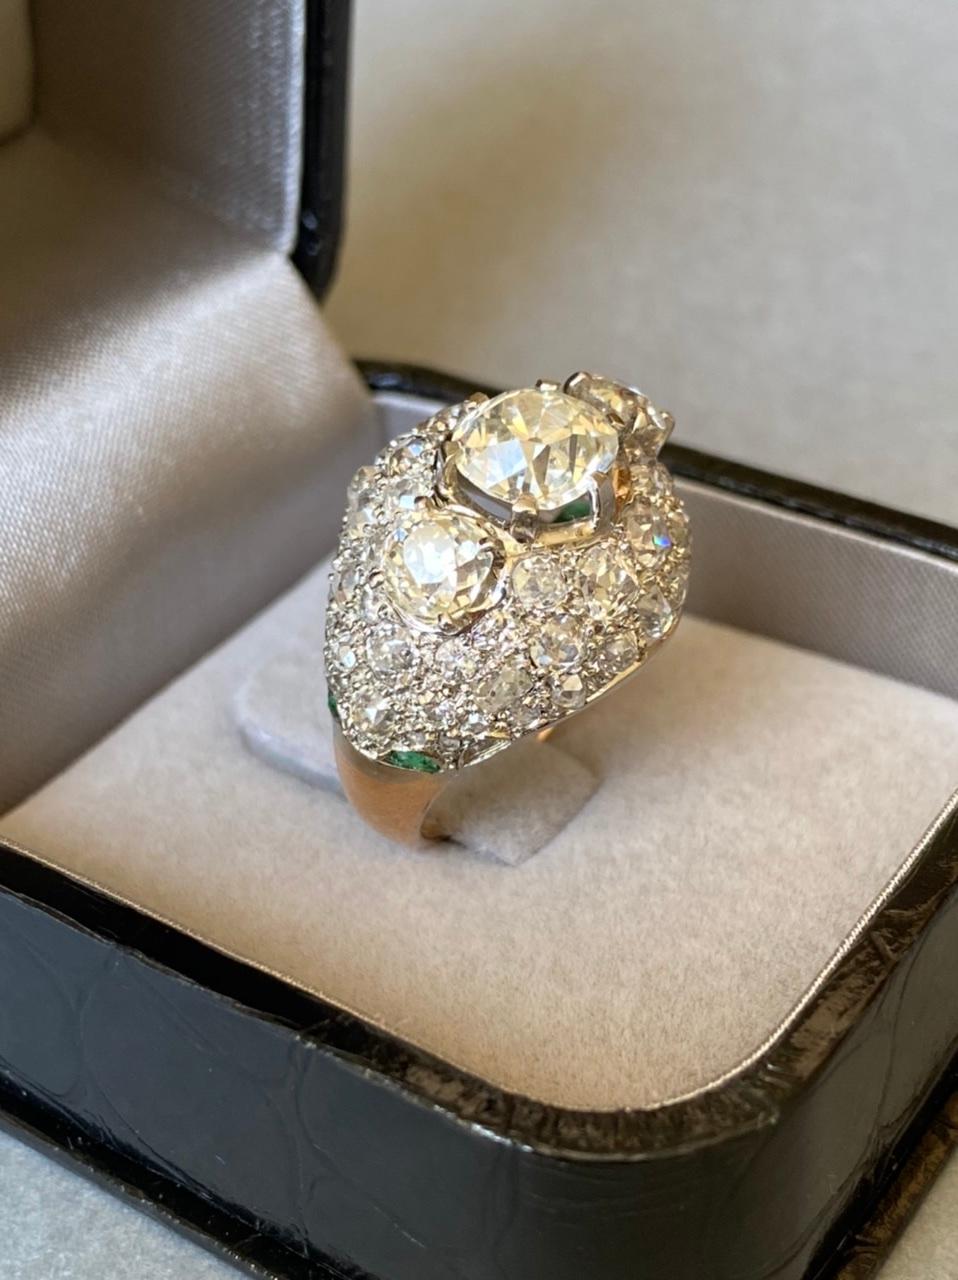 Very beautiful ring, made in France circa 1940/1950. 

Made in yellow gold 18k and platinum. Marks for gold: the Owl, marks for platinum (the old man).
The diamonds are old European cut, they are good quality. The central diamonds weights 1.91